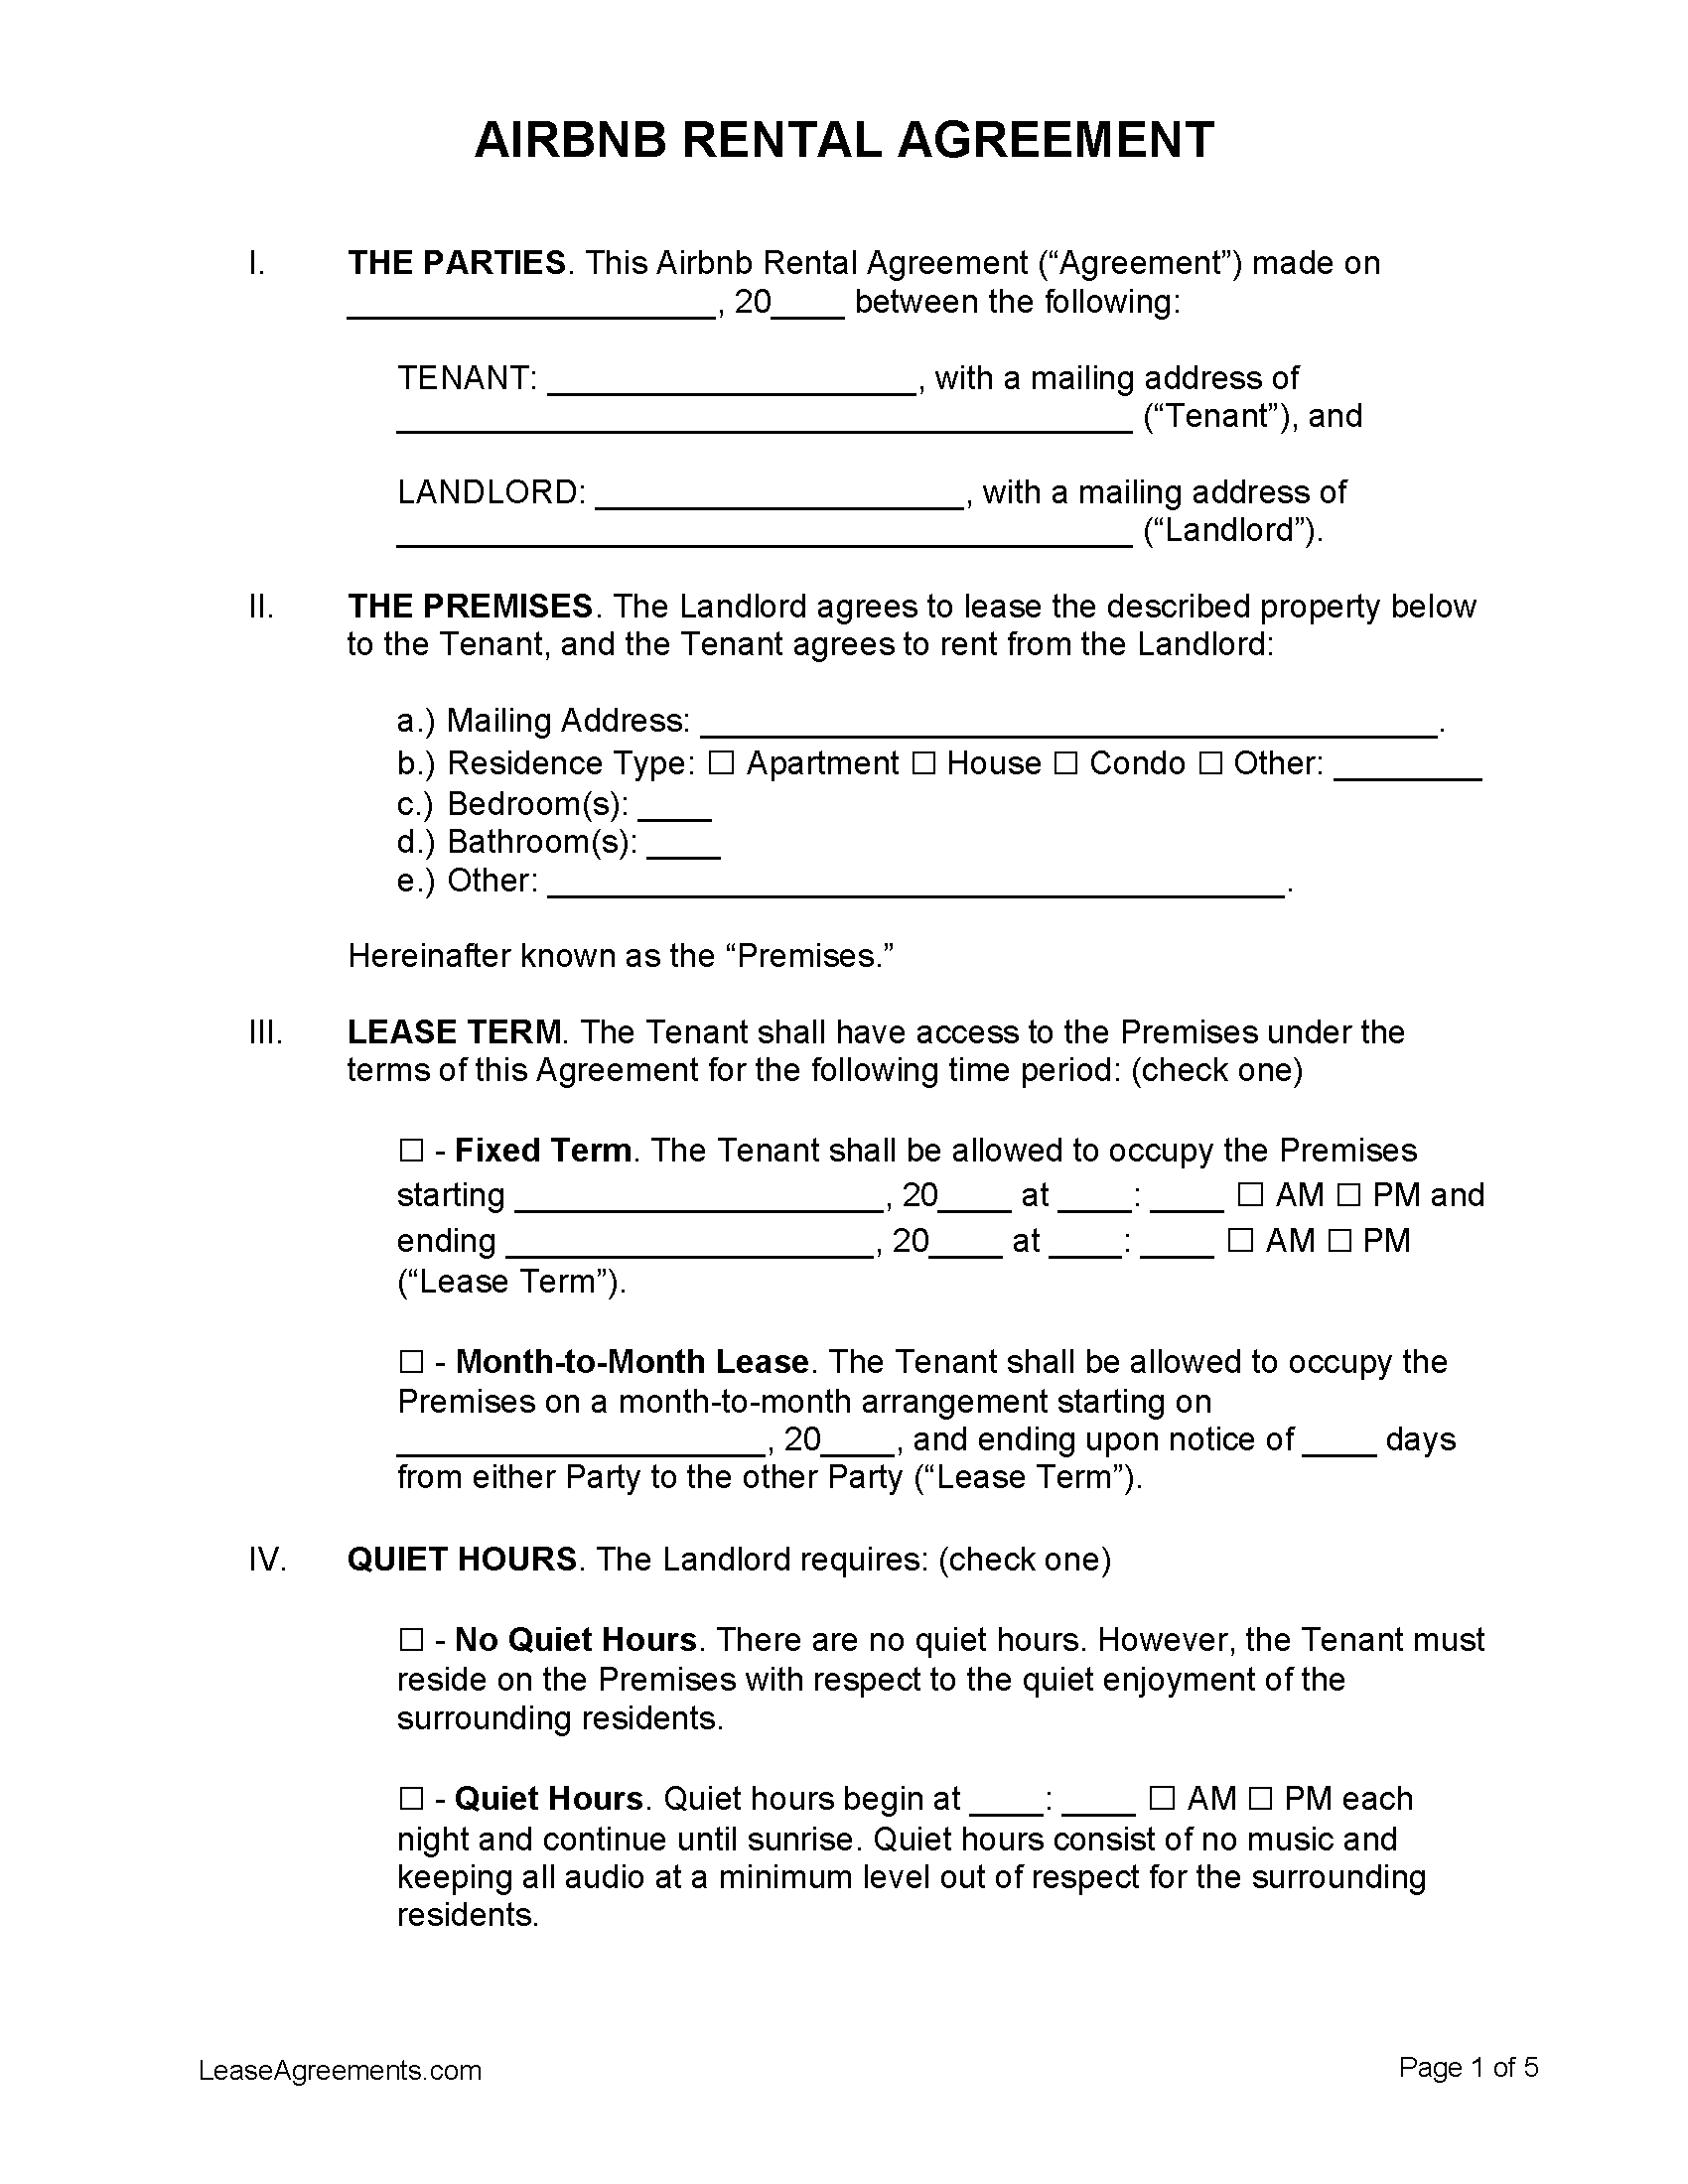 Free Airbnb Lease Agreement Template | PDF | WORD | RTF